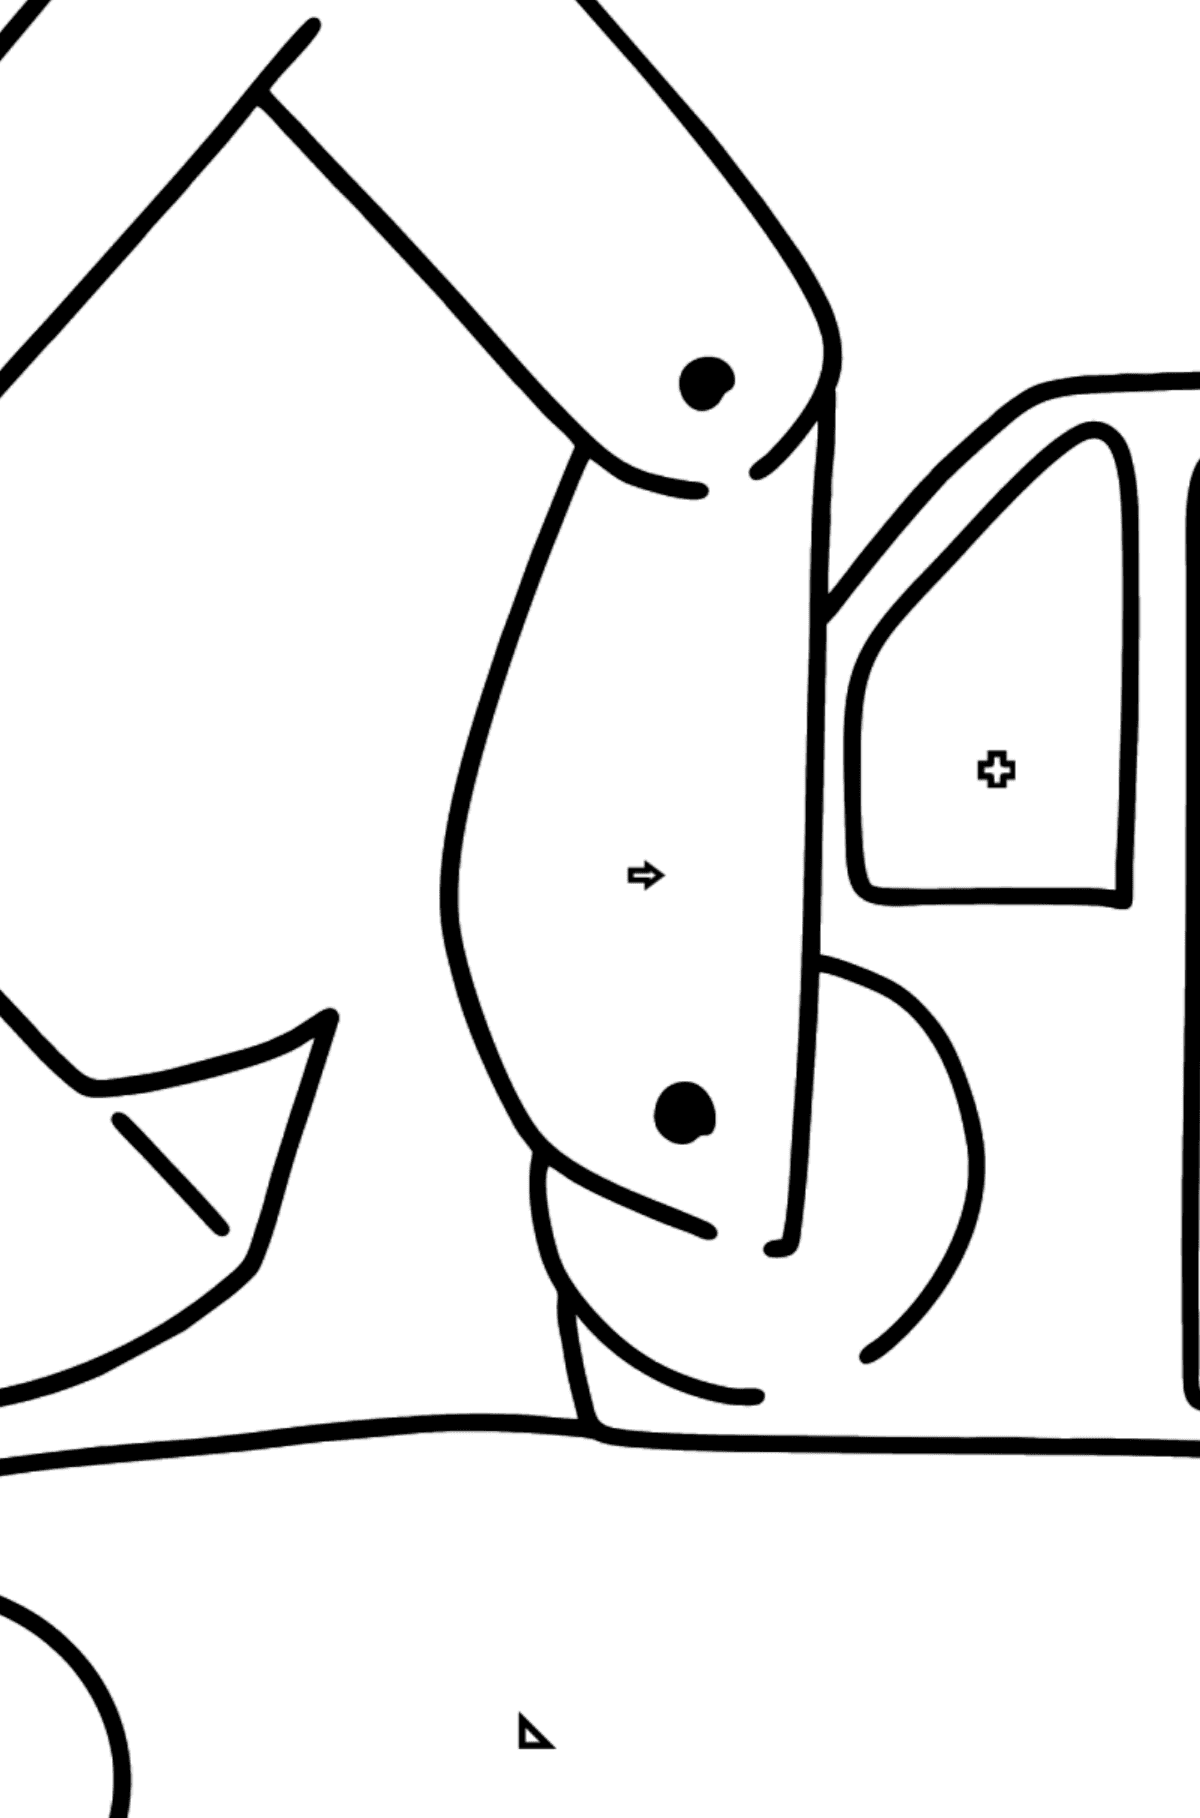 Tractor excavator coloring pages for kids - Coloring by Geometric Shapes for Kids